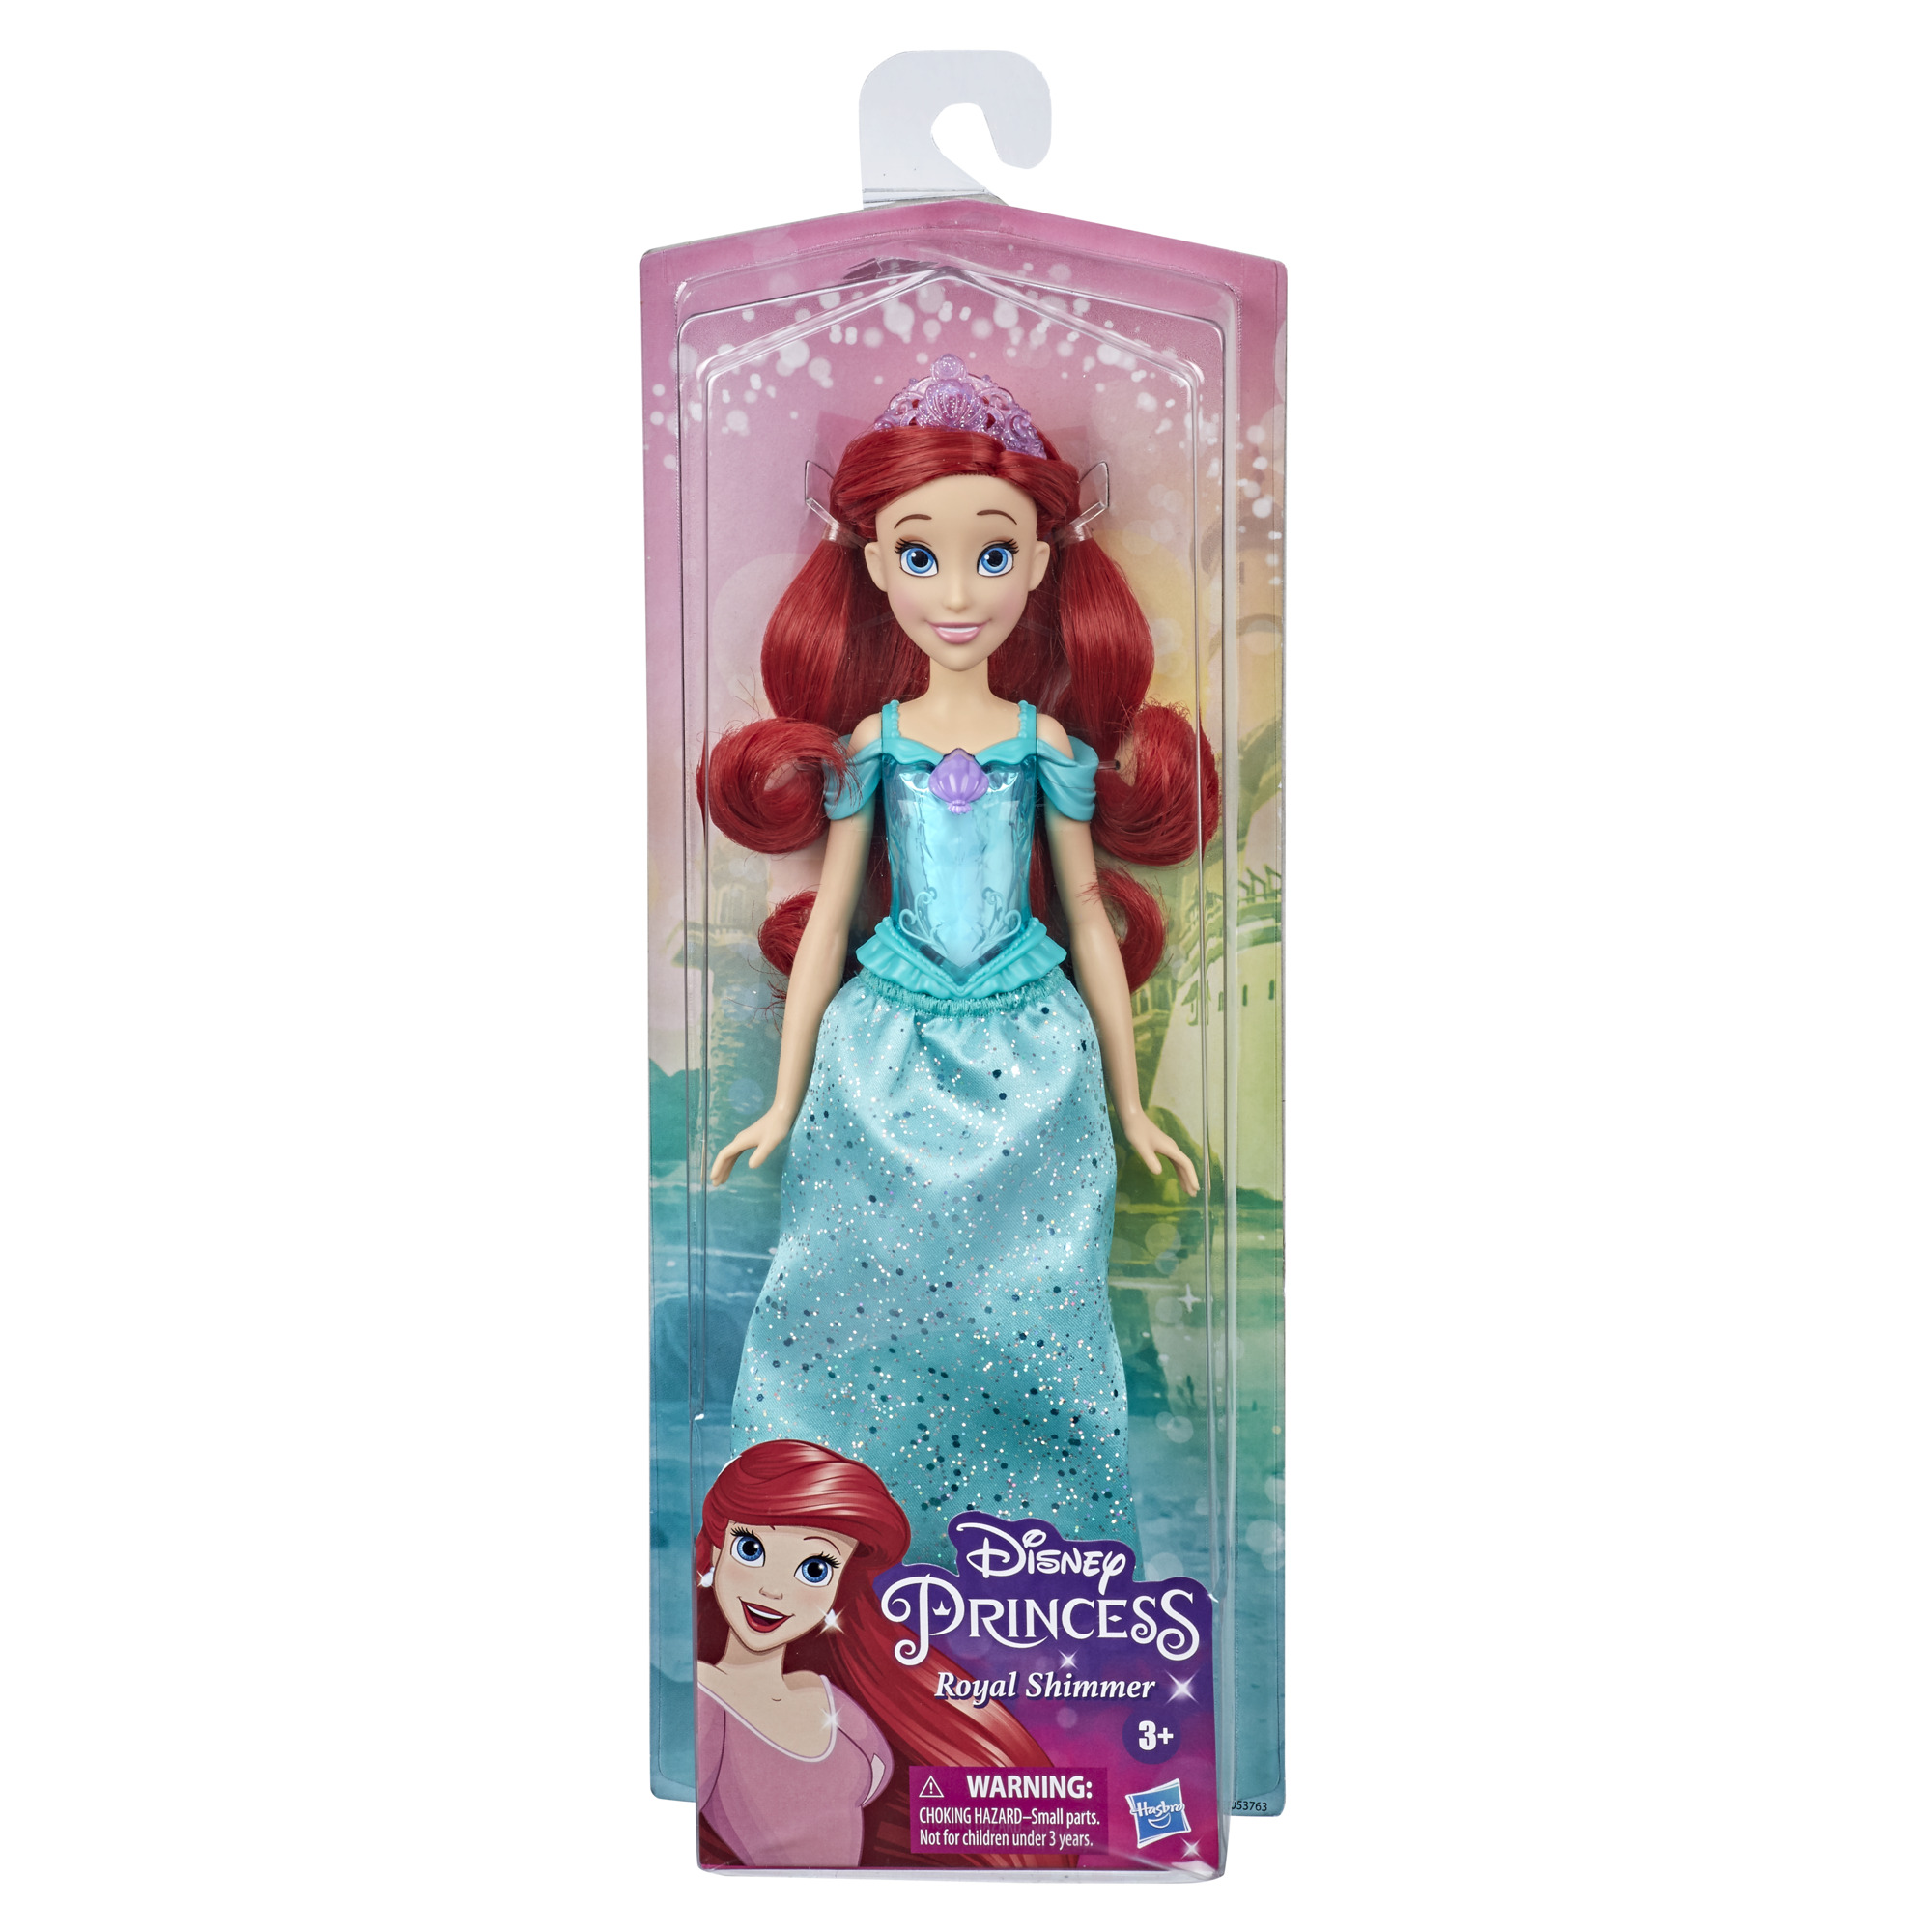 Disney Princess Royal Shimmer Ariel Doll, Fashion Doll with Skirt and Accessories, Toy for Kids Ages 3 and Up - image 3 of 5